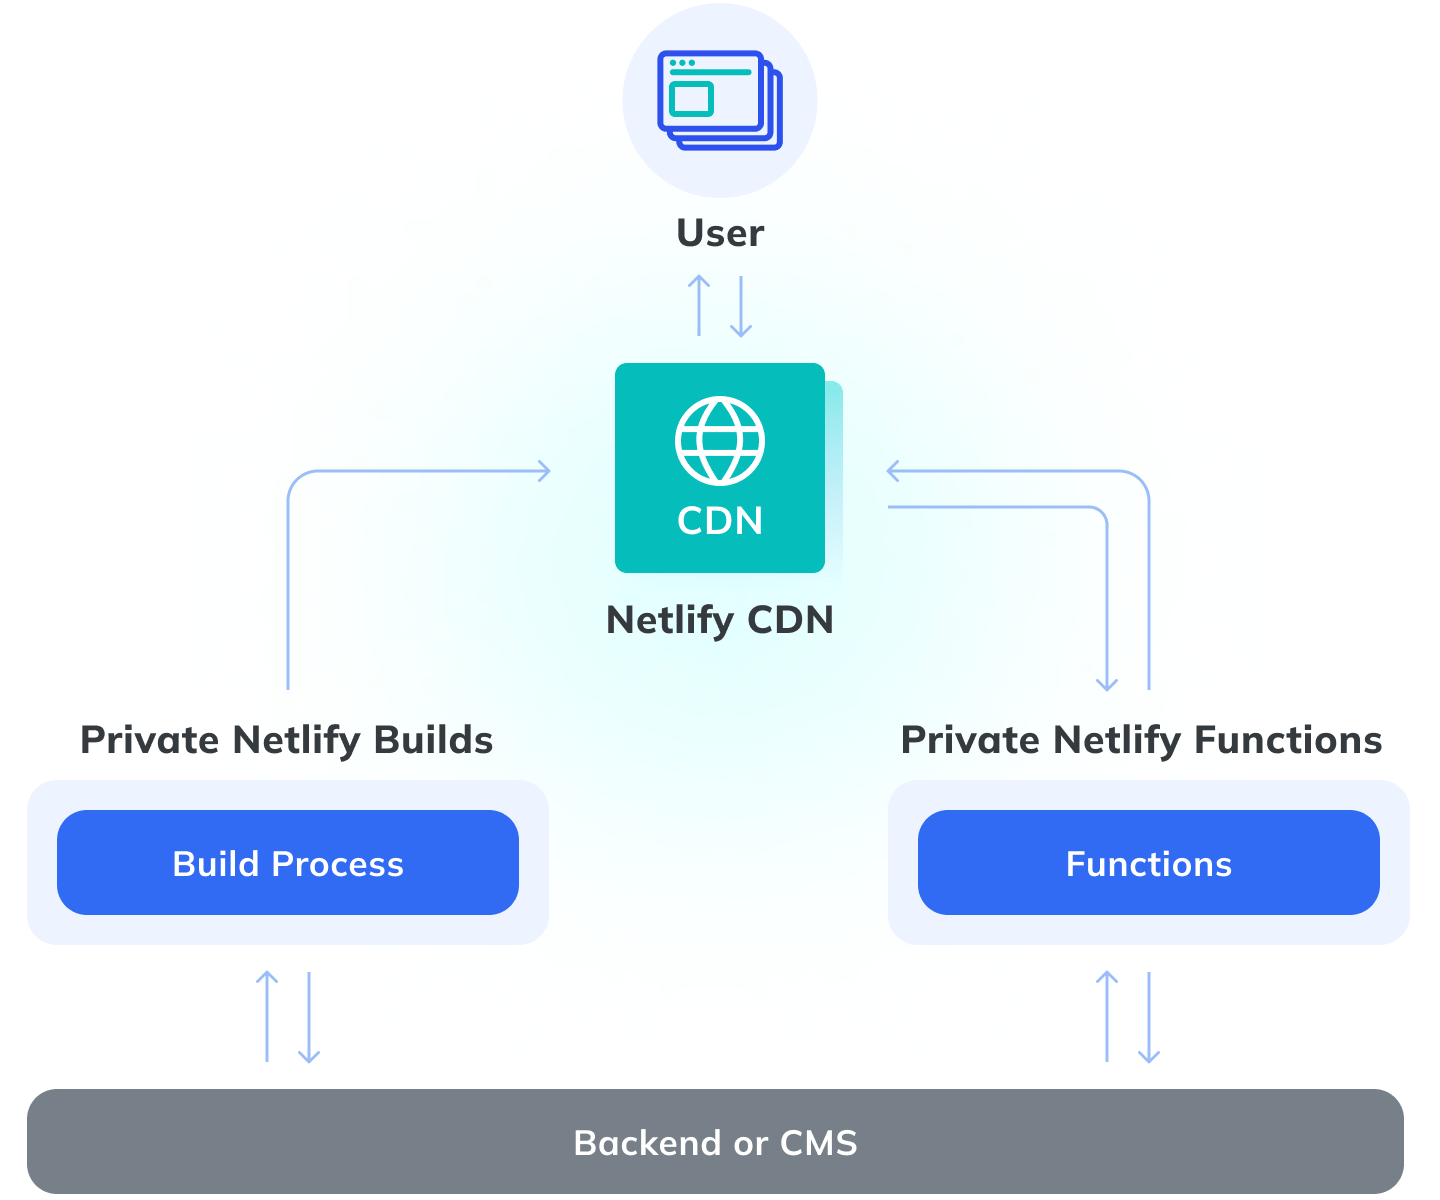 Private Connectivity uses separate private networks for builds and functions. All requests to your backend from builds and functions come through these private networks before responses are sent to the CDN and served to users.